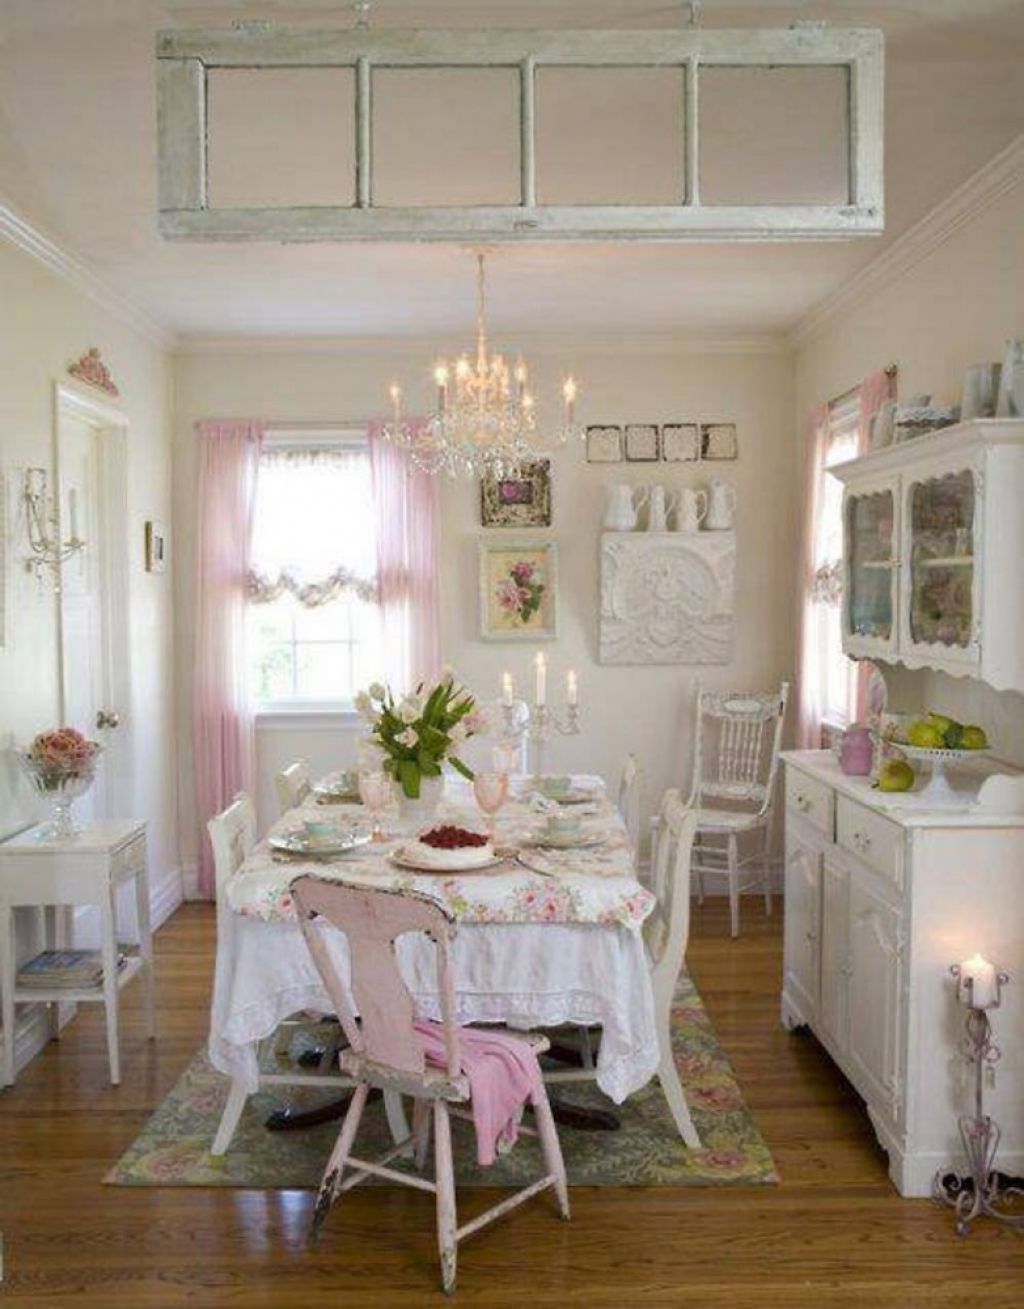 Shab Chic Small Kicthen Decor Floral Tablecloth Rustic Dining Throughout Small Shabby Chic Chandelier (View 8 of 15)